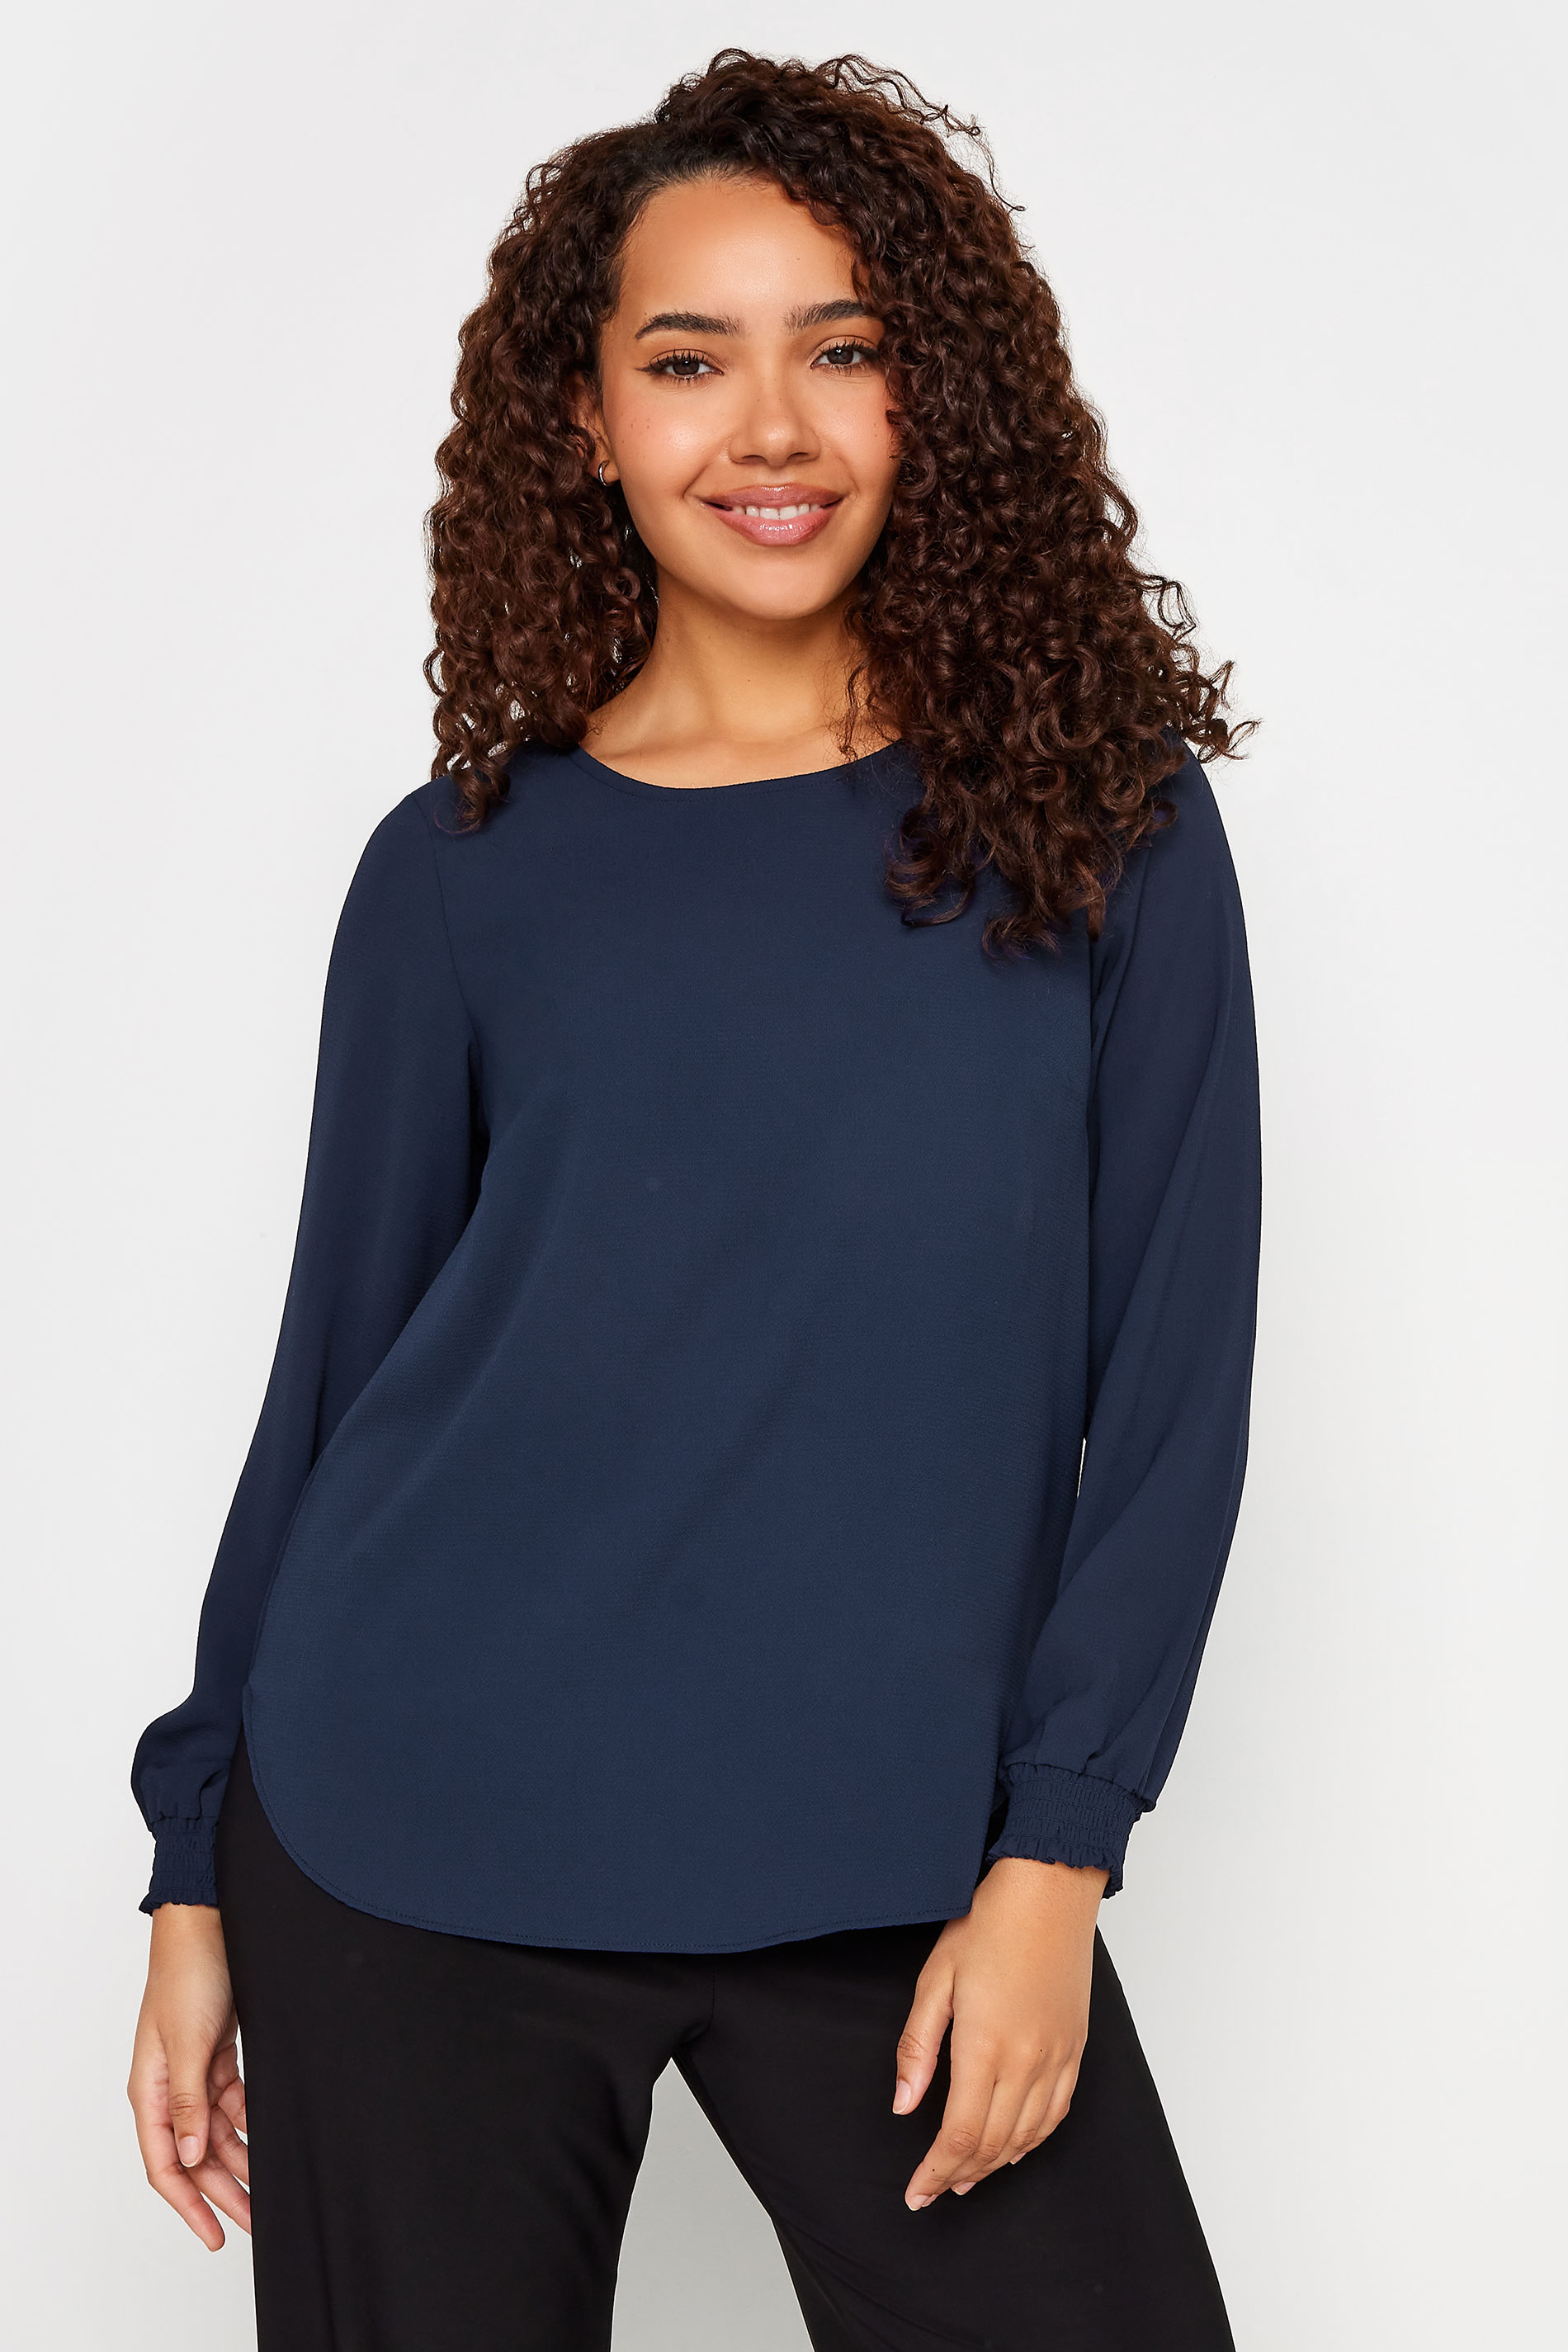 M&Co Navy Blue Shirred Cuff Blouse | M&Co 1